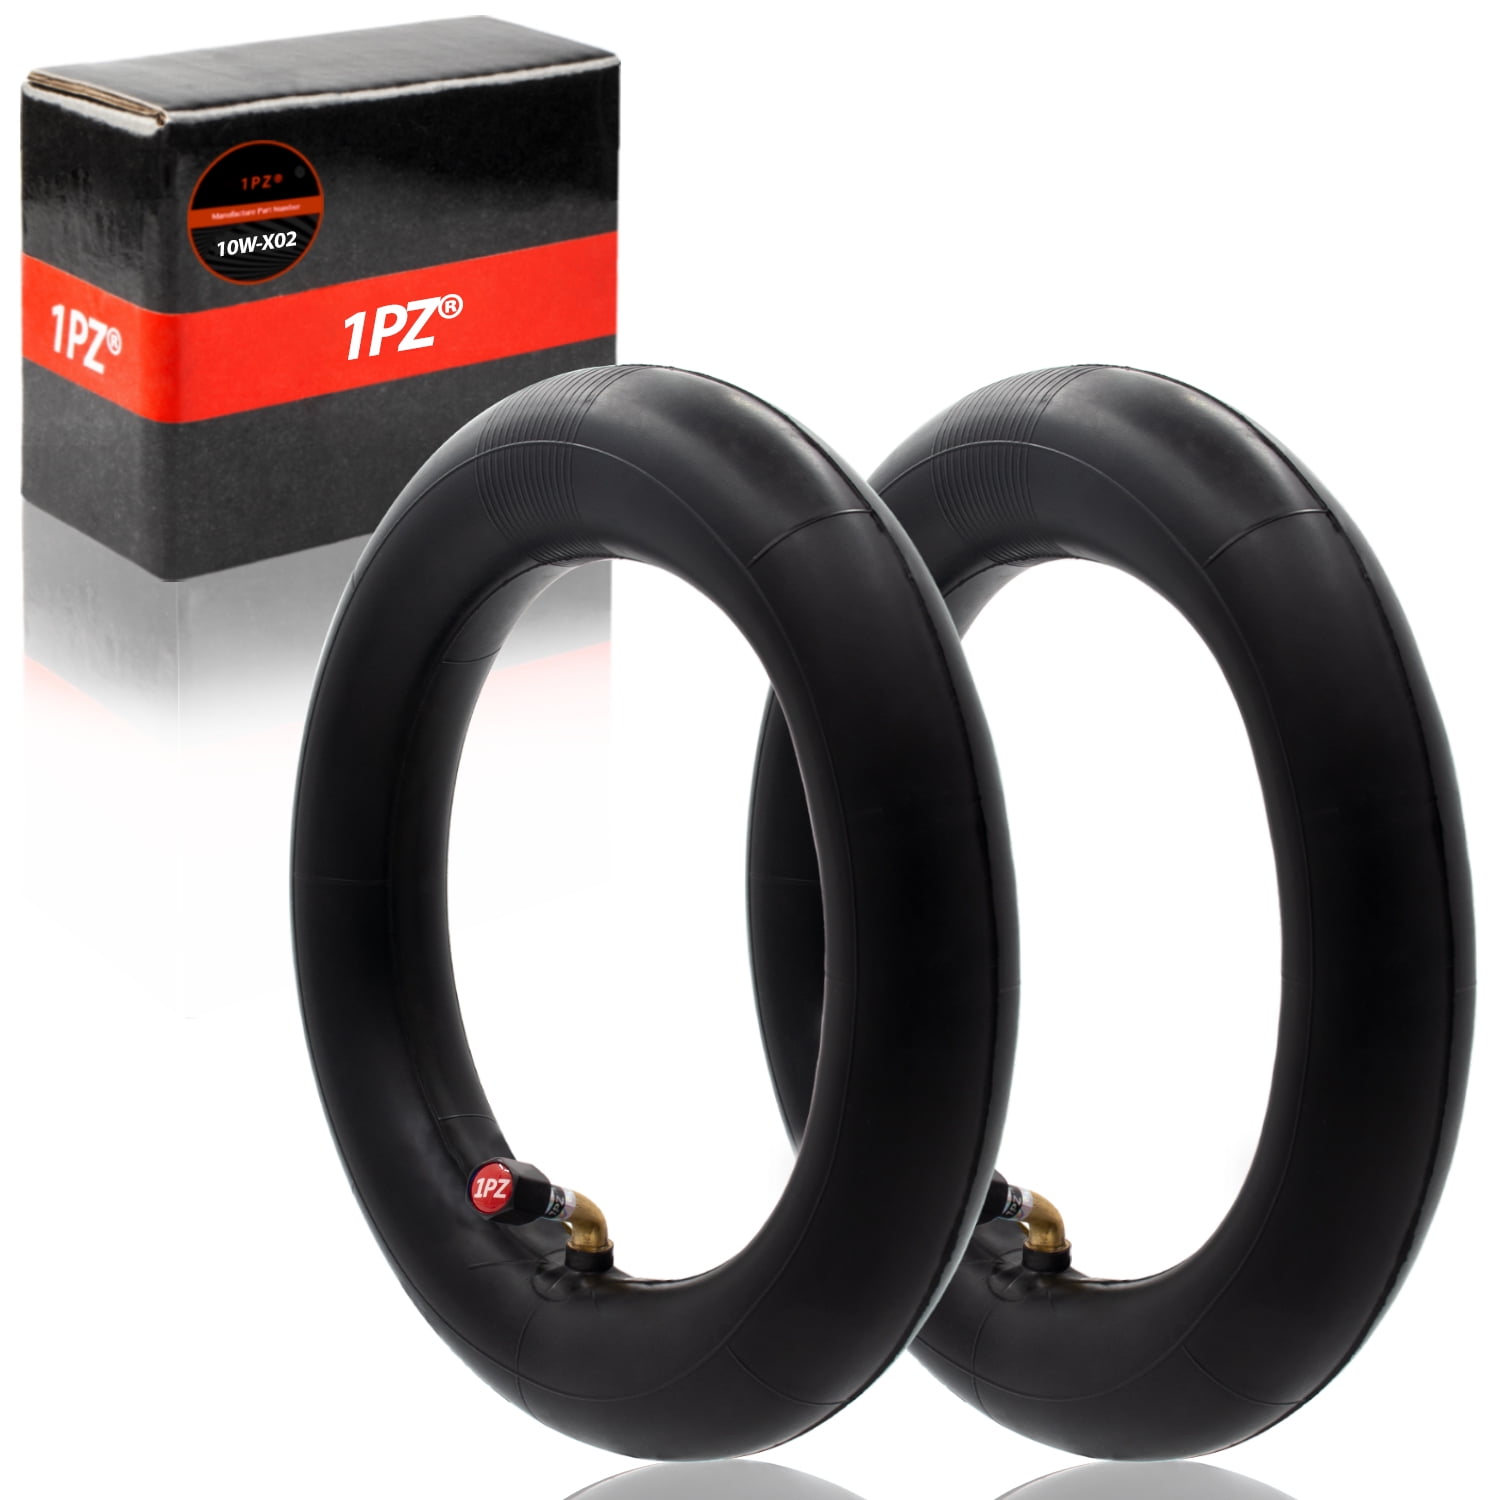 1PZ 10x2.125inch / 10x2.125 innertube inner tube for self balance scooter  hoverboards (Pack of 2) SBS-IT1 